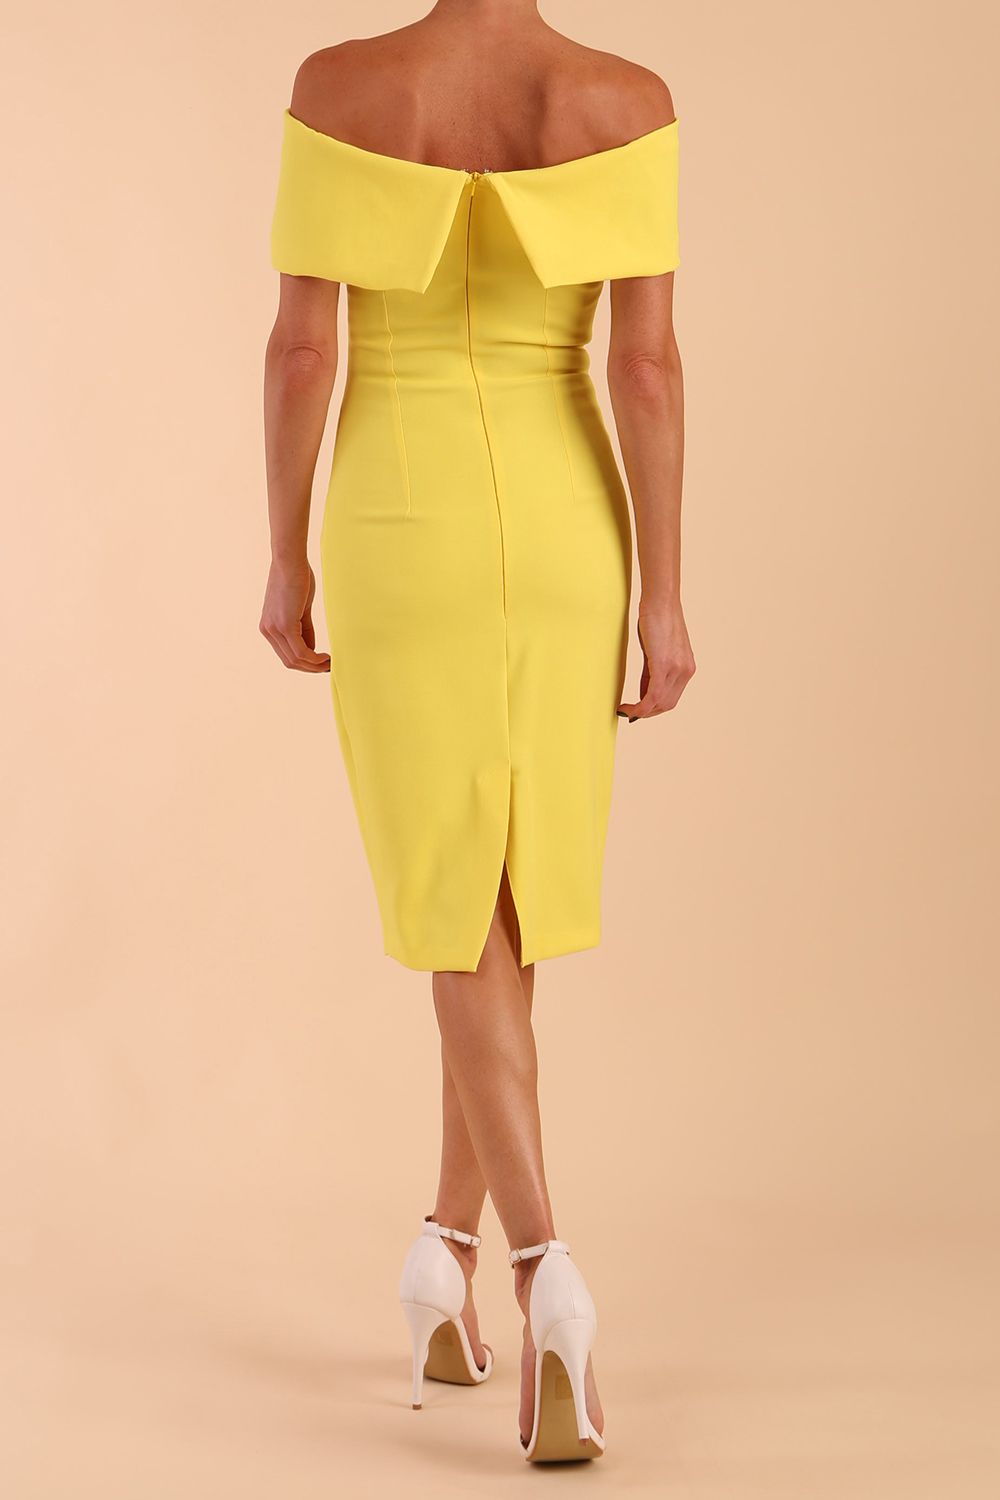 model is wearing diva catwalk mariposa pencil dress with Detailed Bardot neckline with fold-over detail and pleated at waist area in Blazing Yellow back